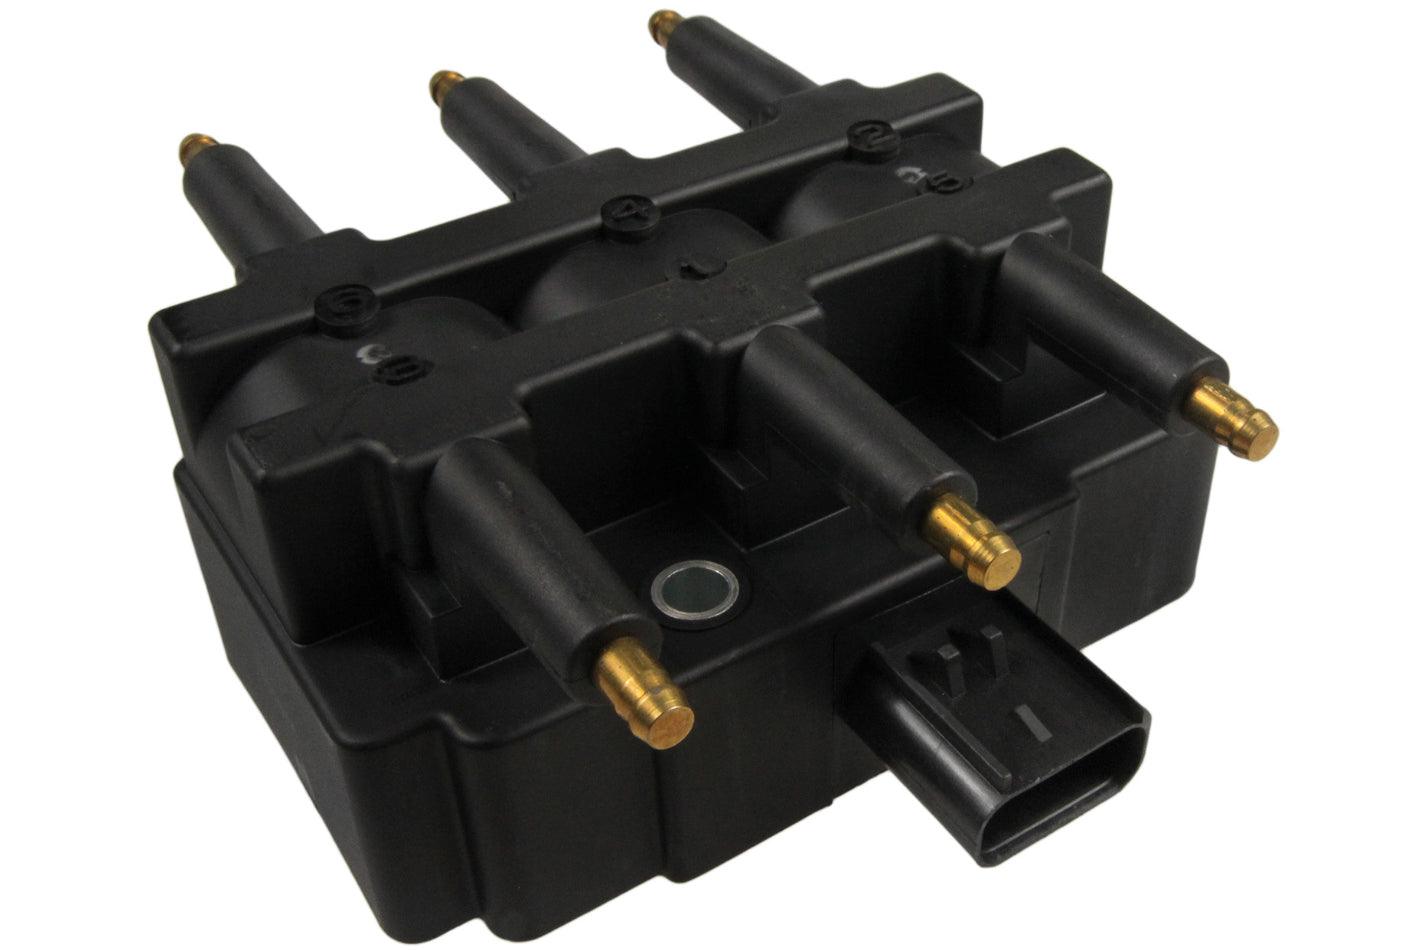 NGK Ignition Coil Stock # 48695 - Burlile Performance Products